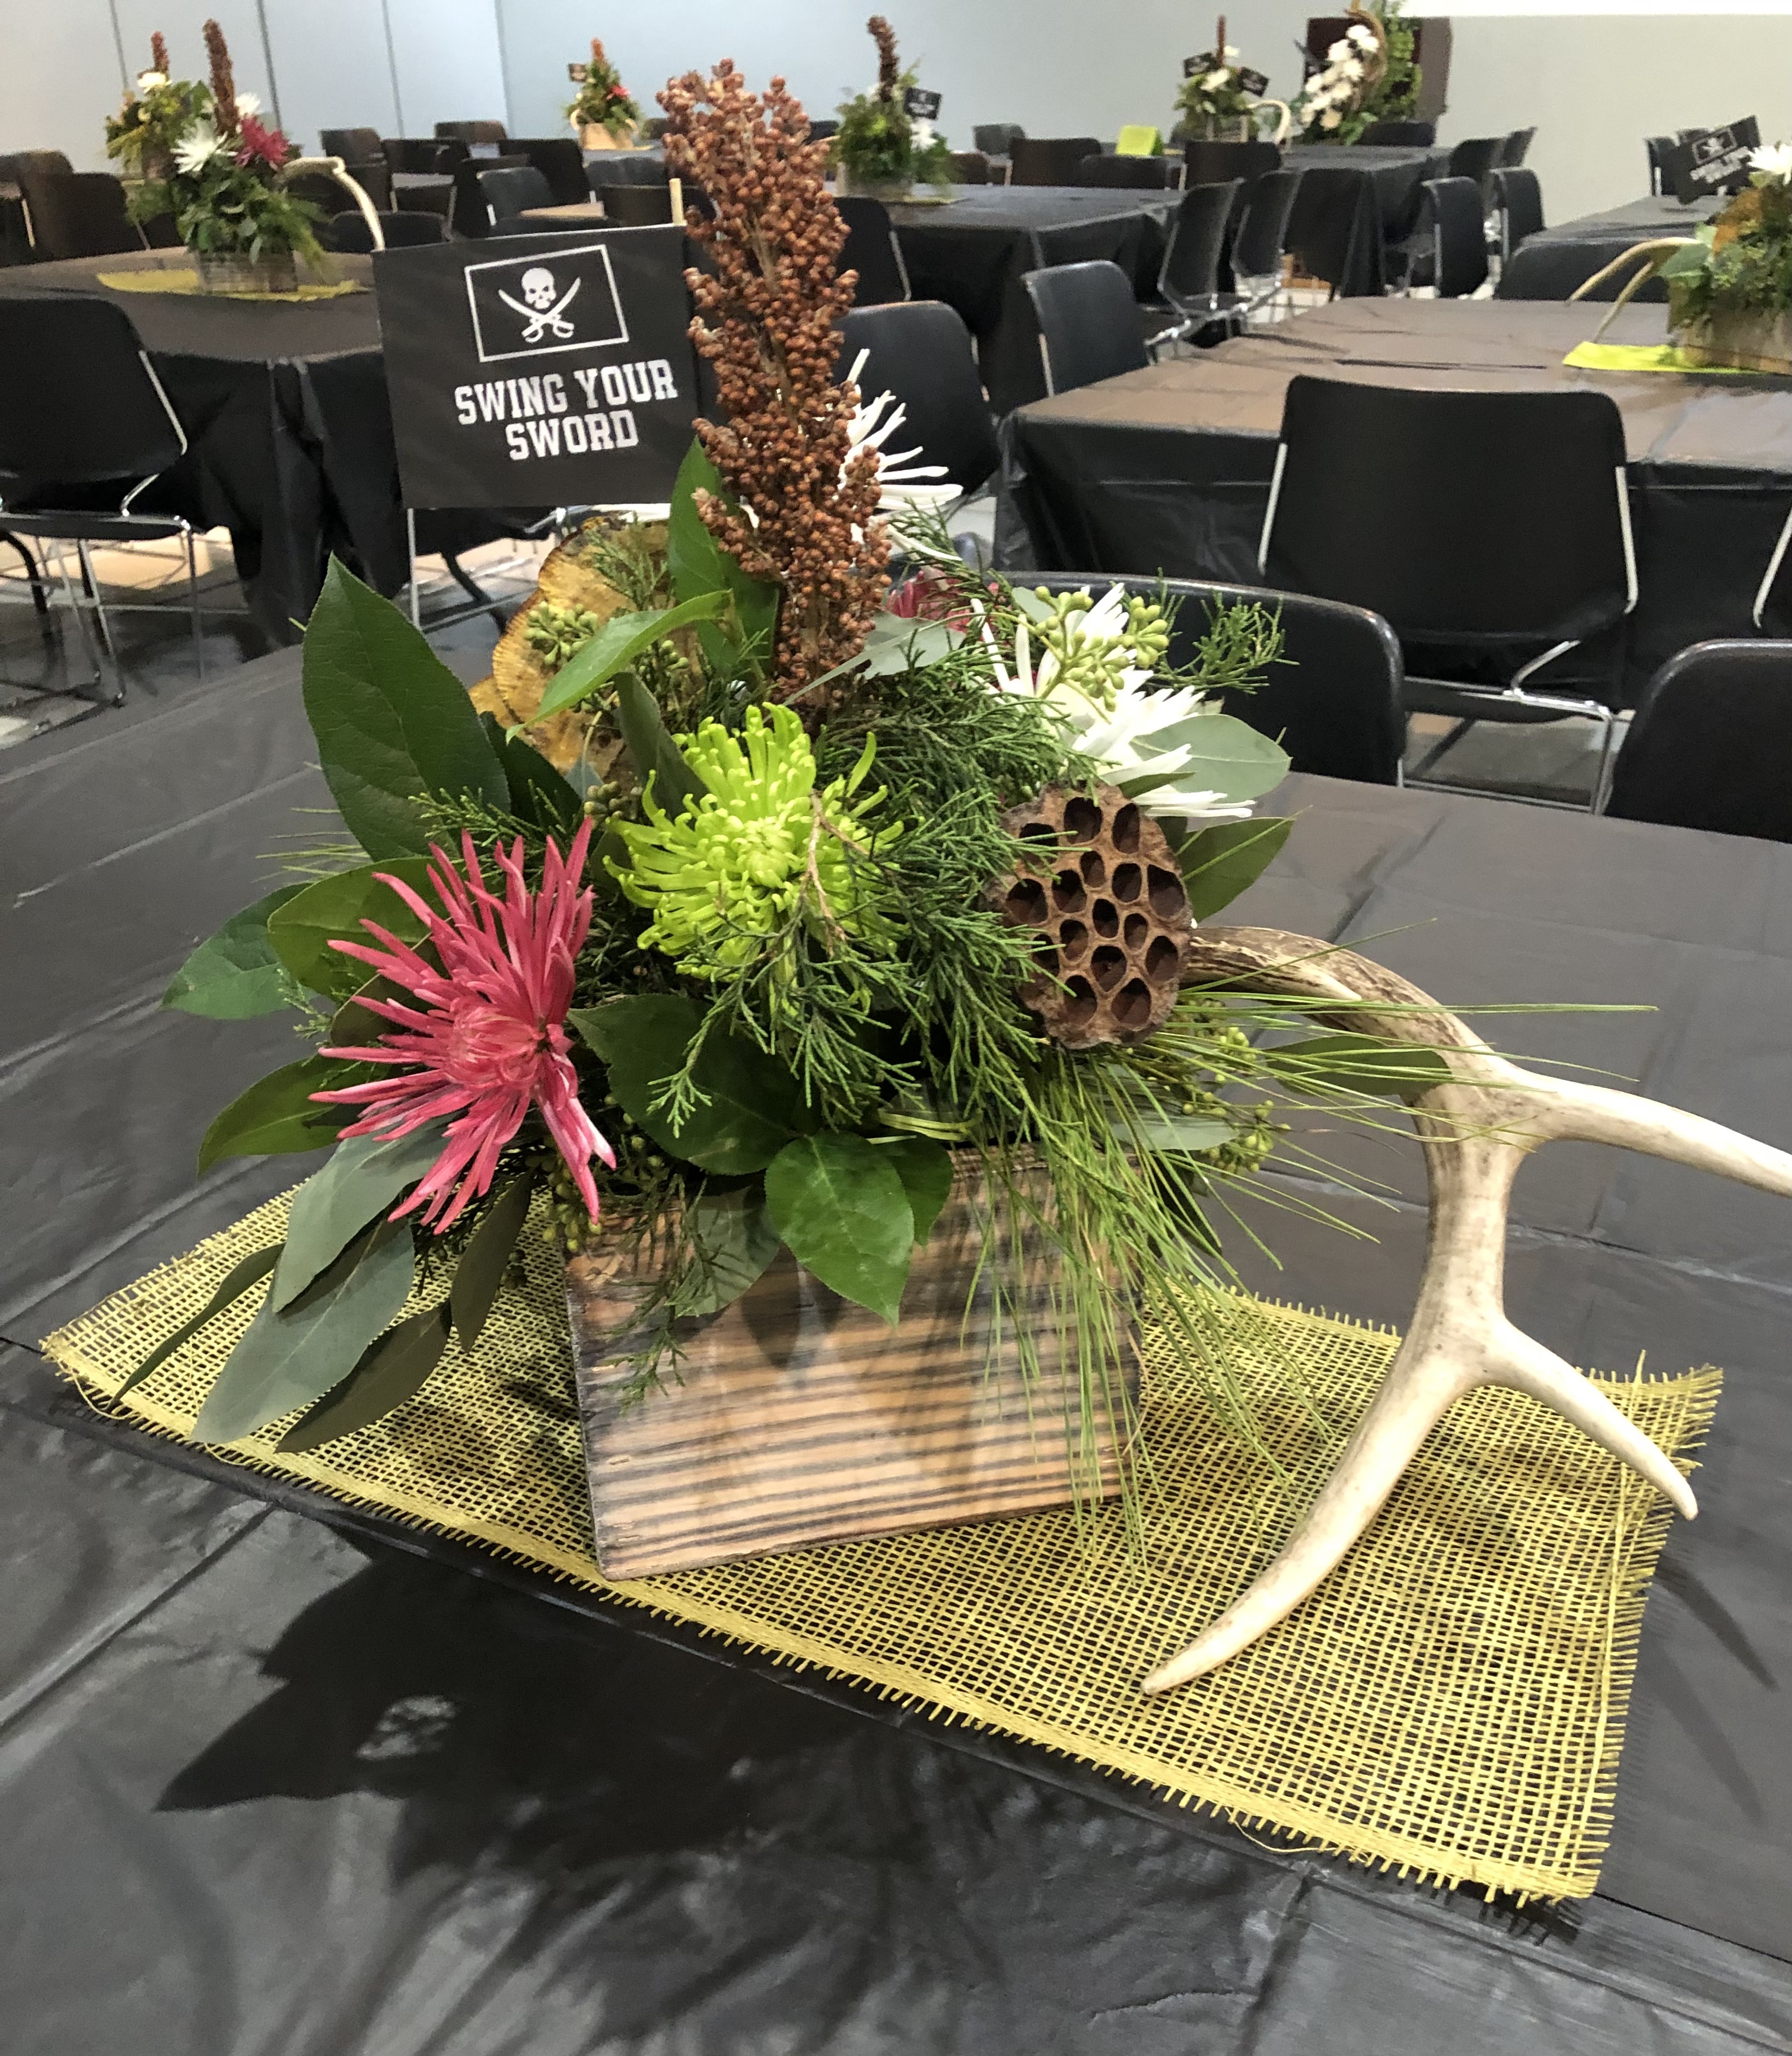  table centerpiece with the “Salute to Coach Leach” – “Swing your Sword” flag